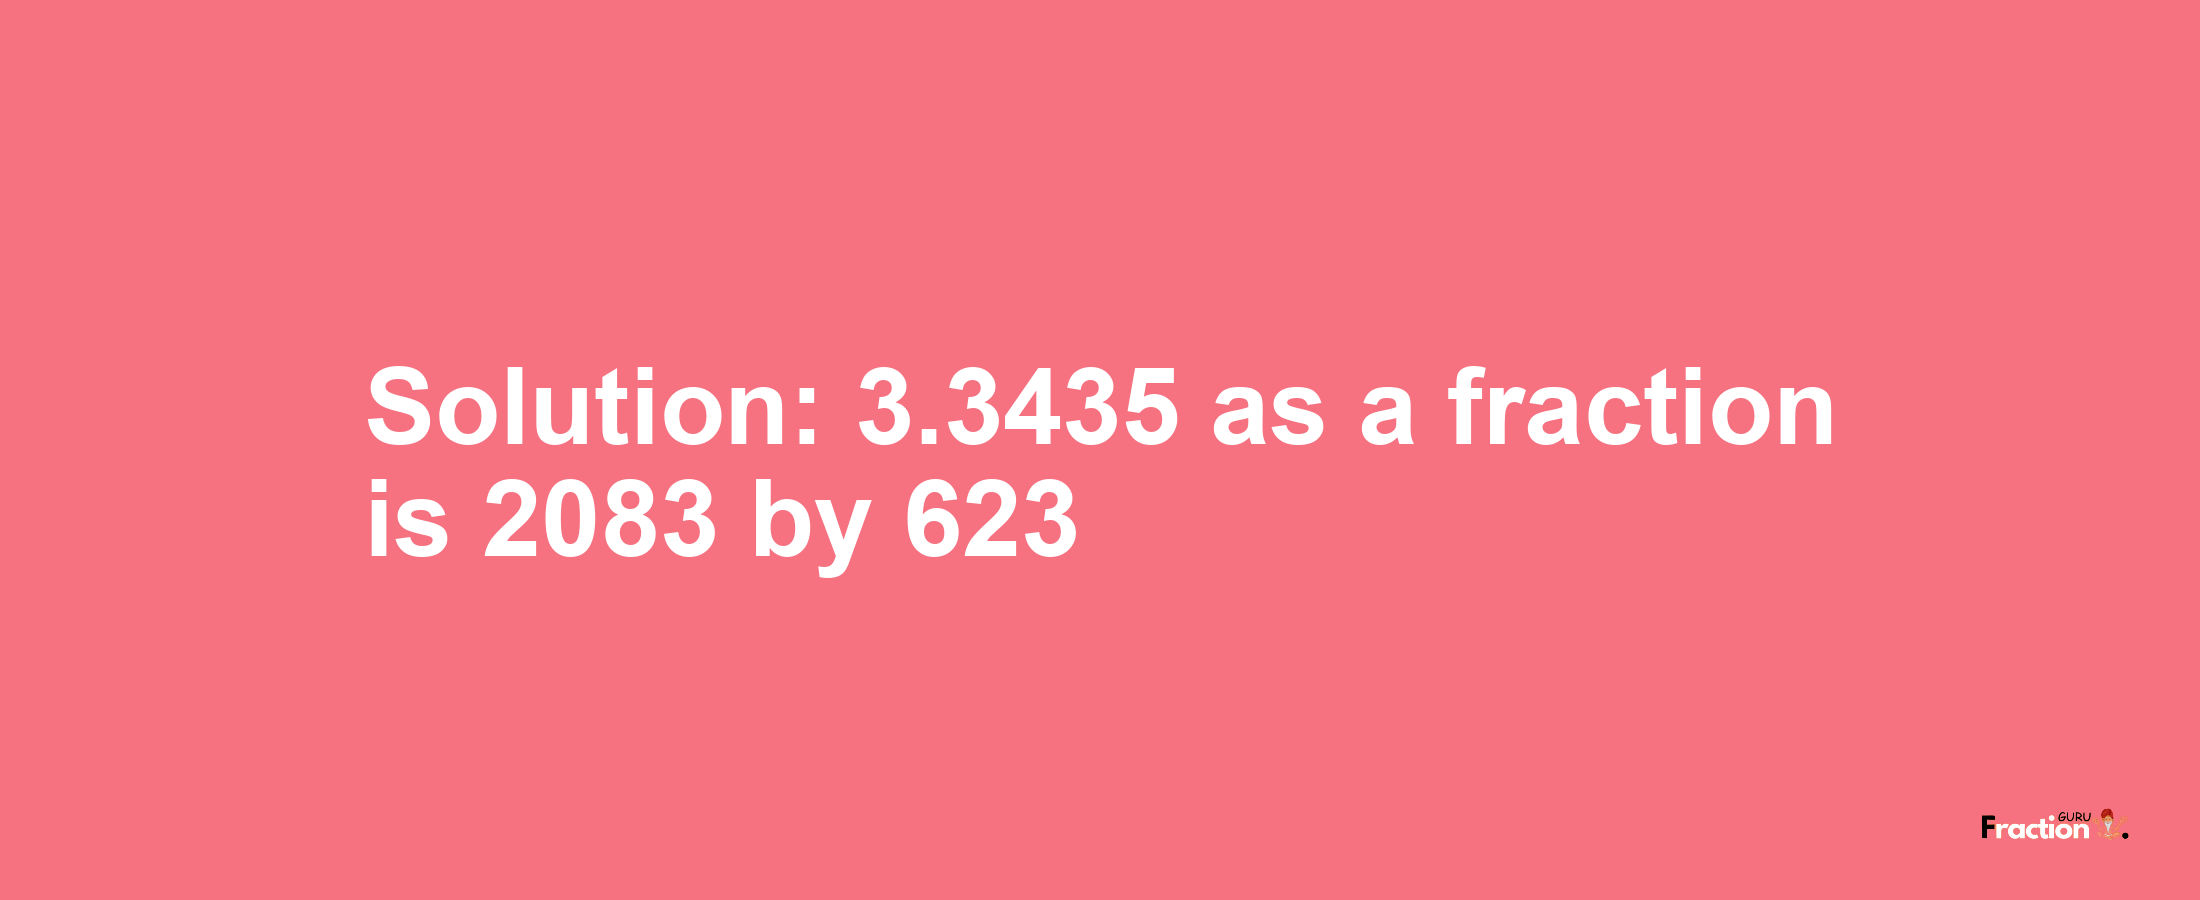 Solution:3.3435 as a fraction is 2083/623